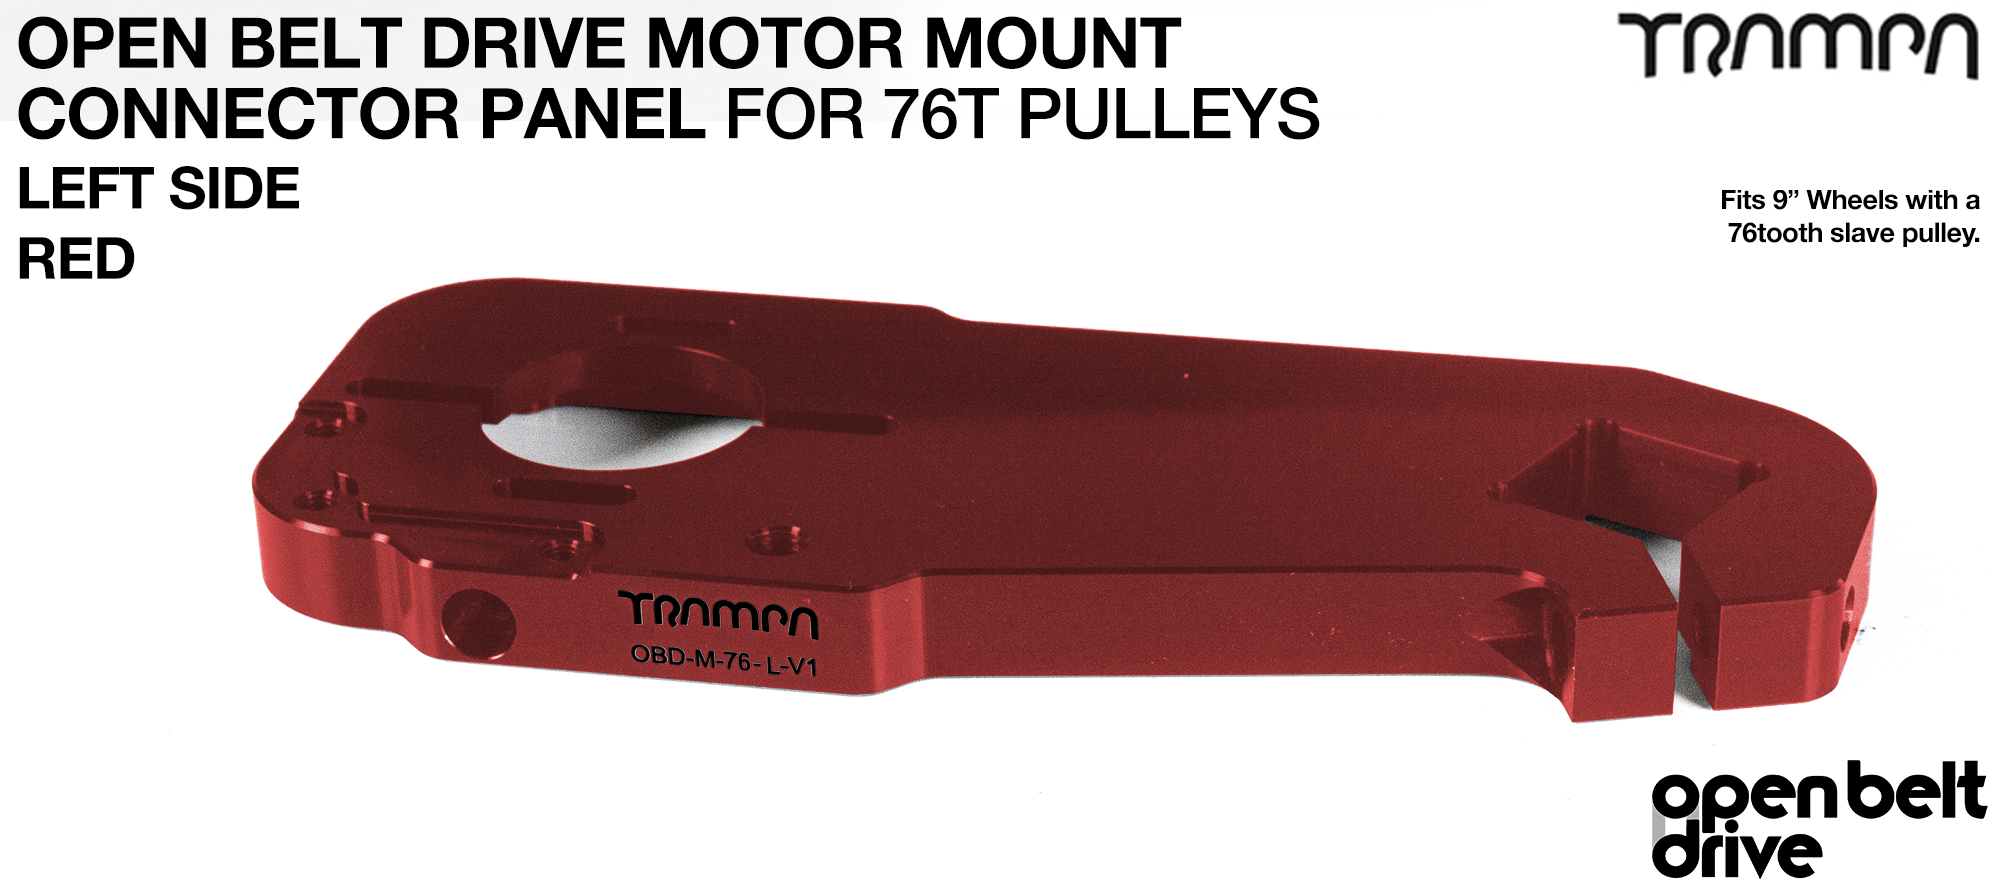 OBD Motor Mount Connector Panel for 76 tooth pulleys - REGULAR - RED